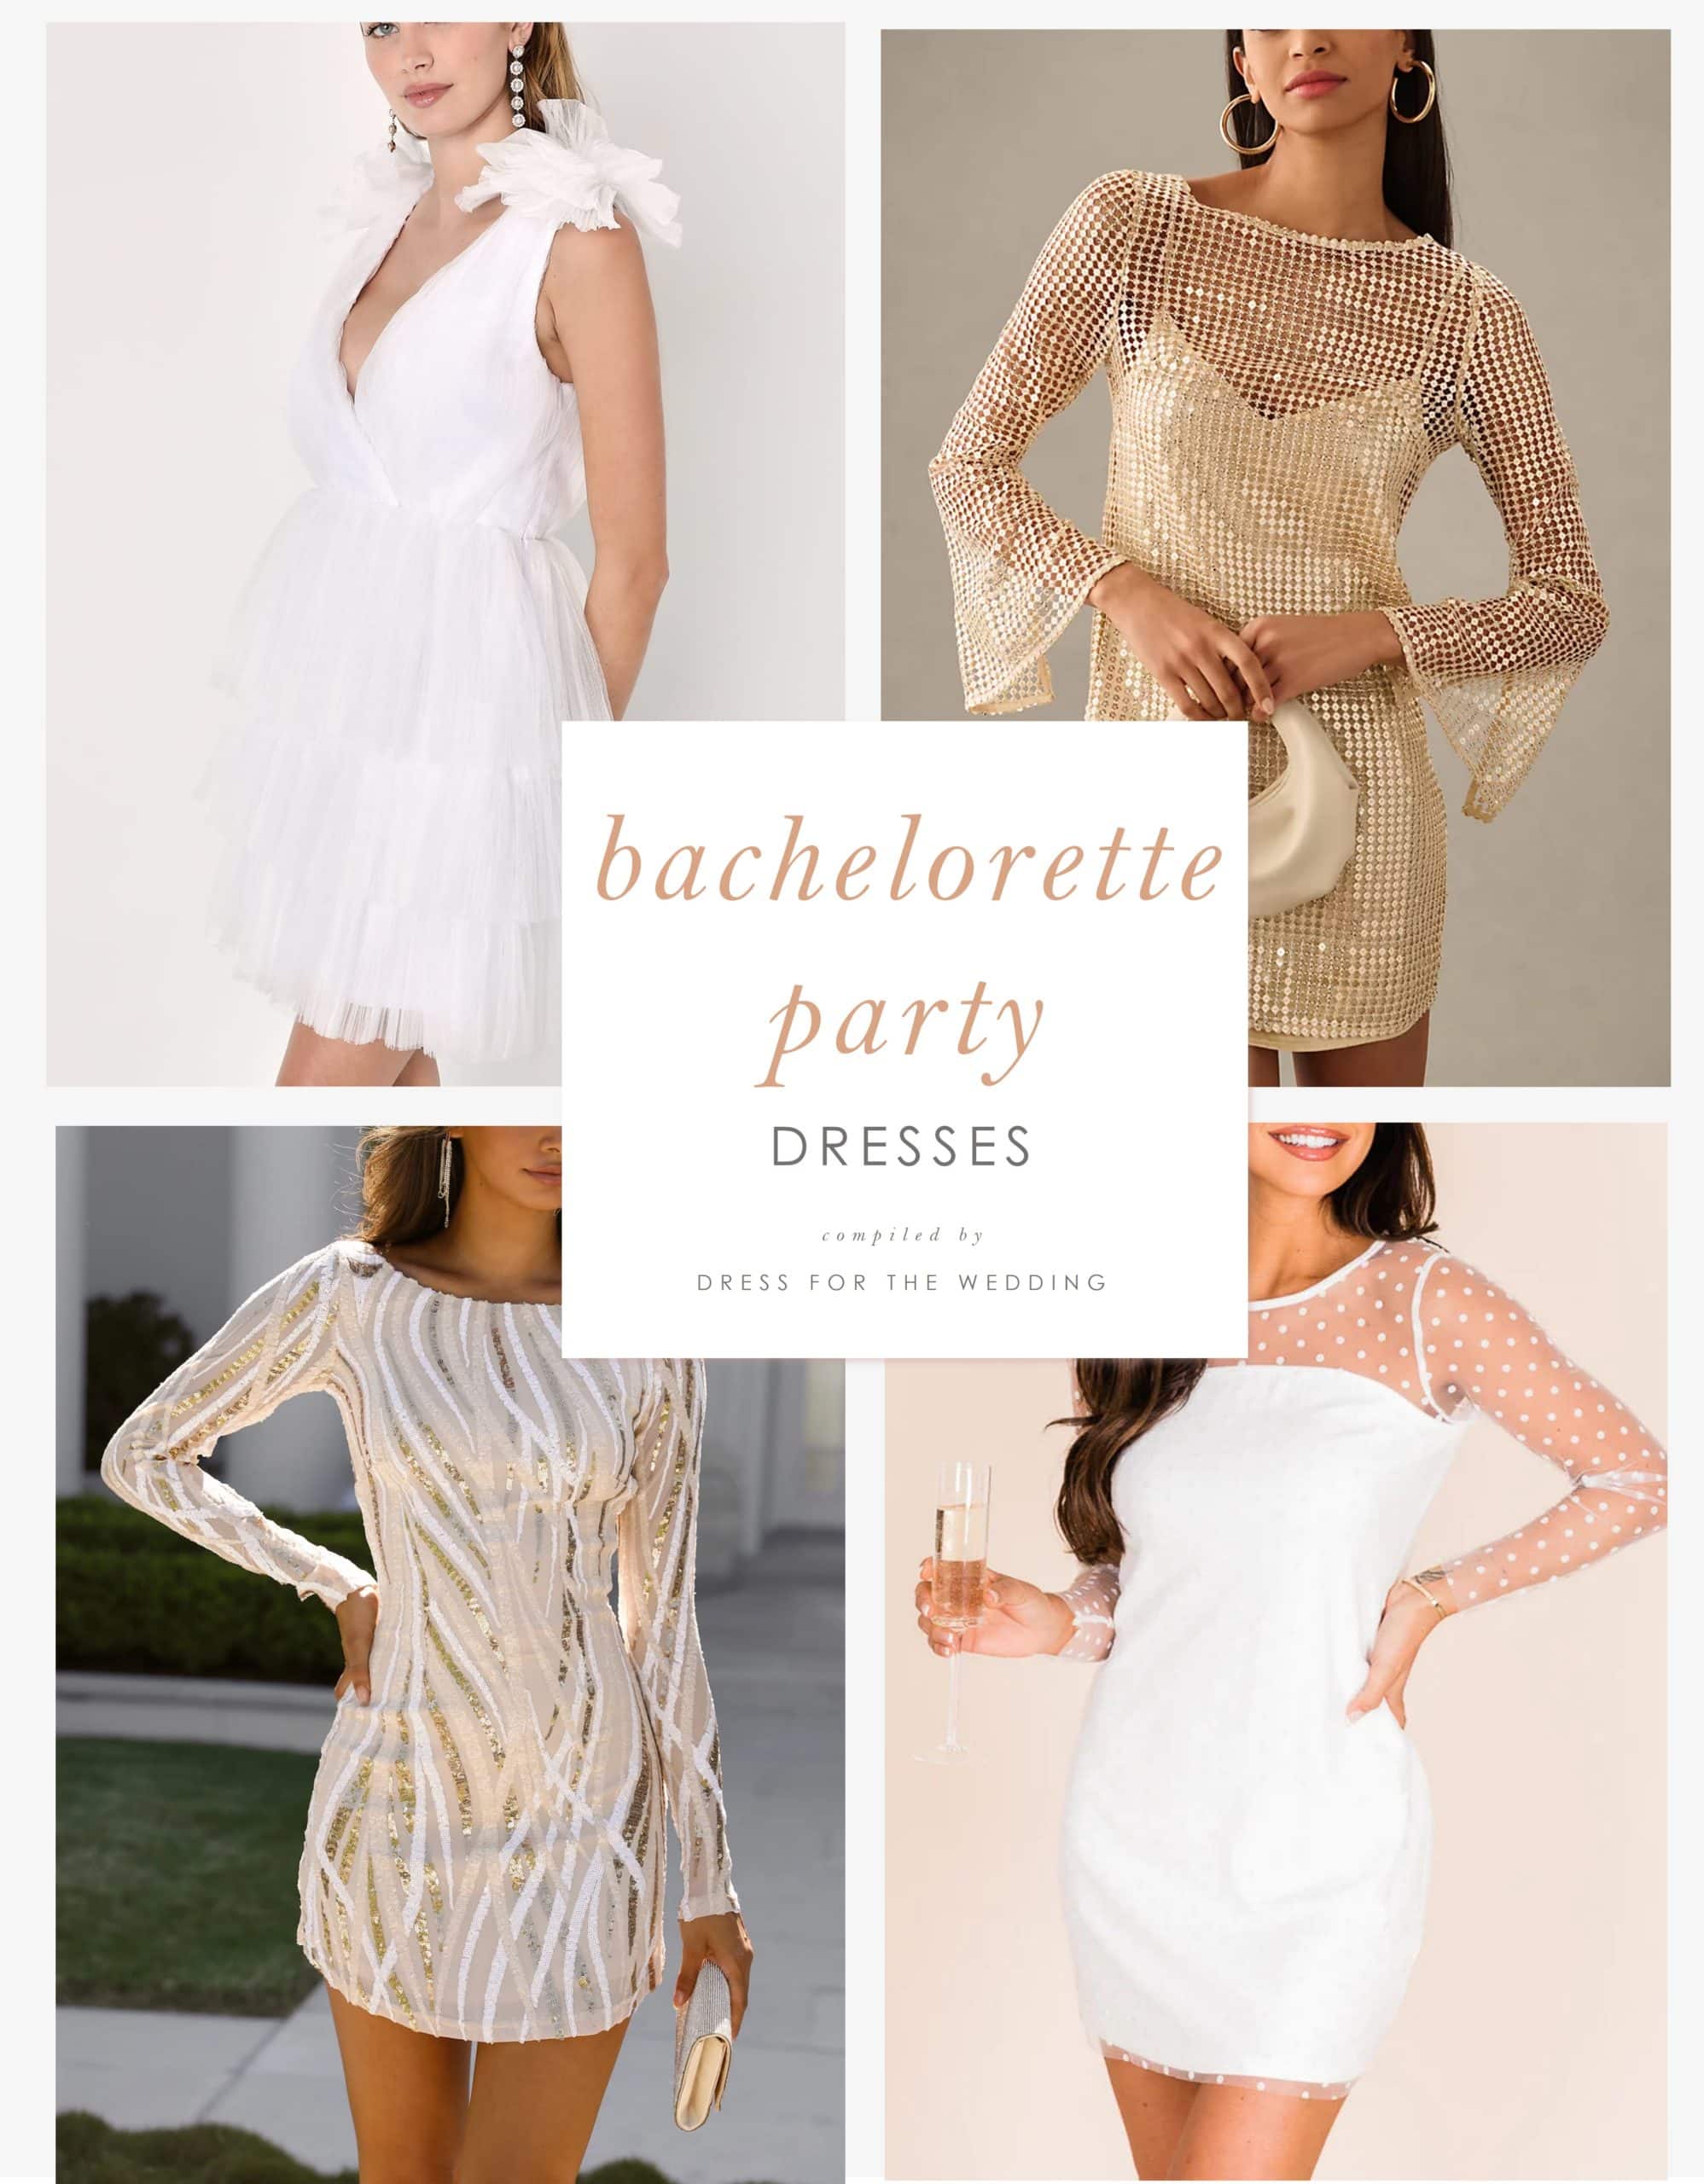 75 Of The Best Bachelorette Party Dresses For Brides Dress For The Wedding